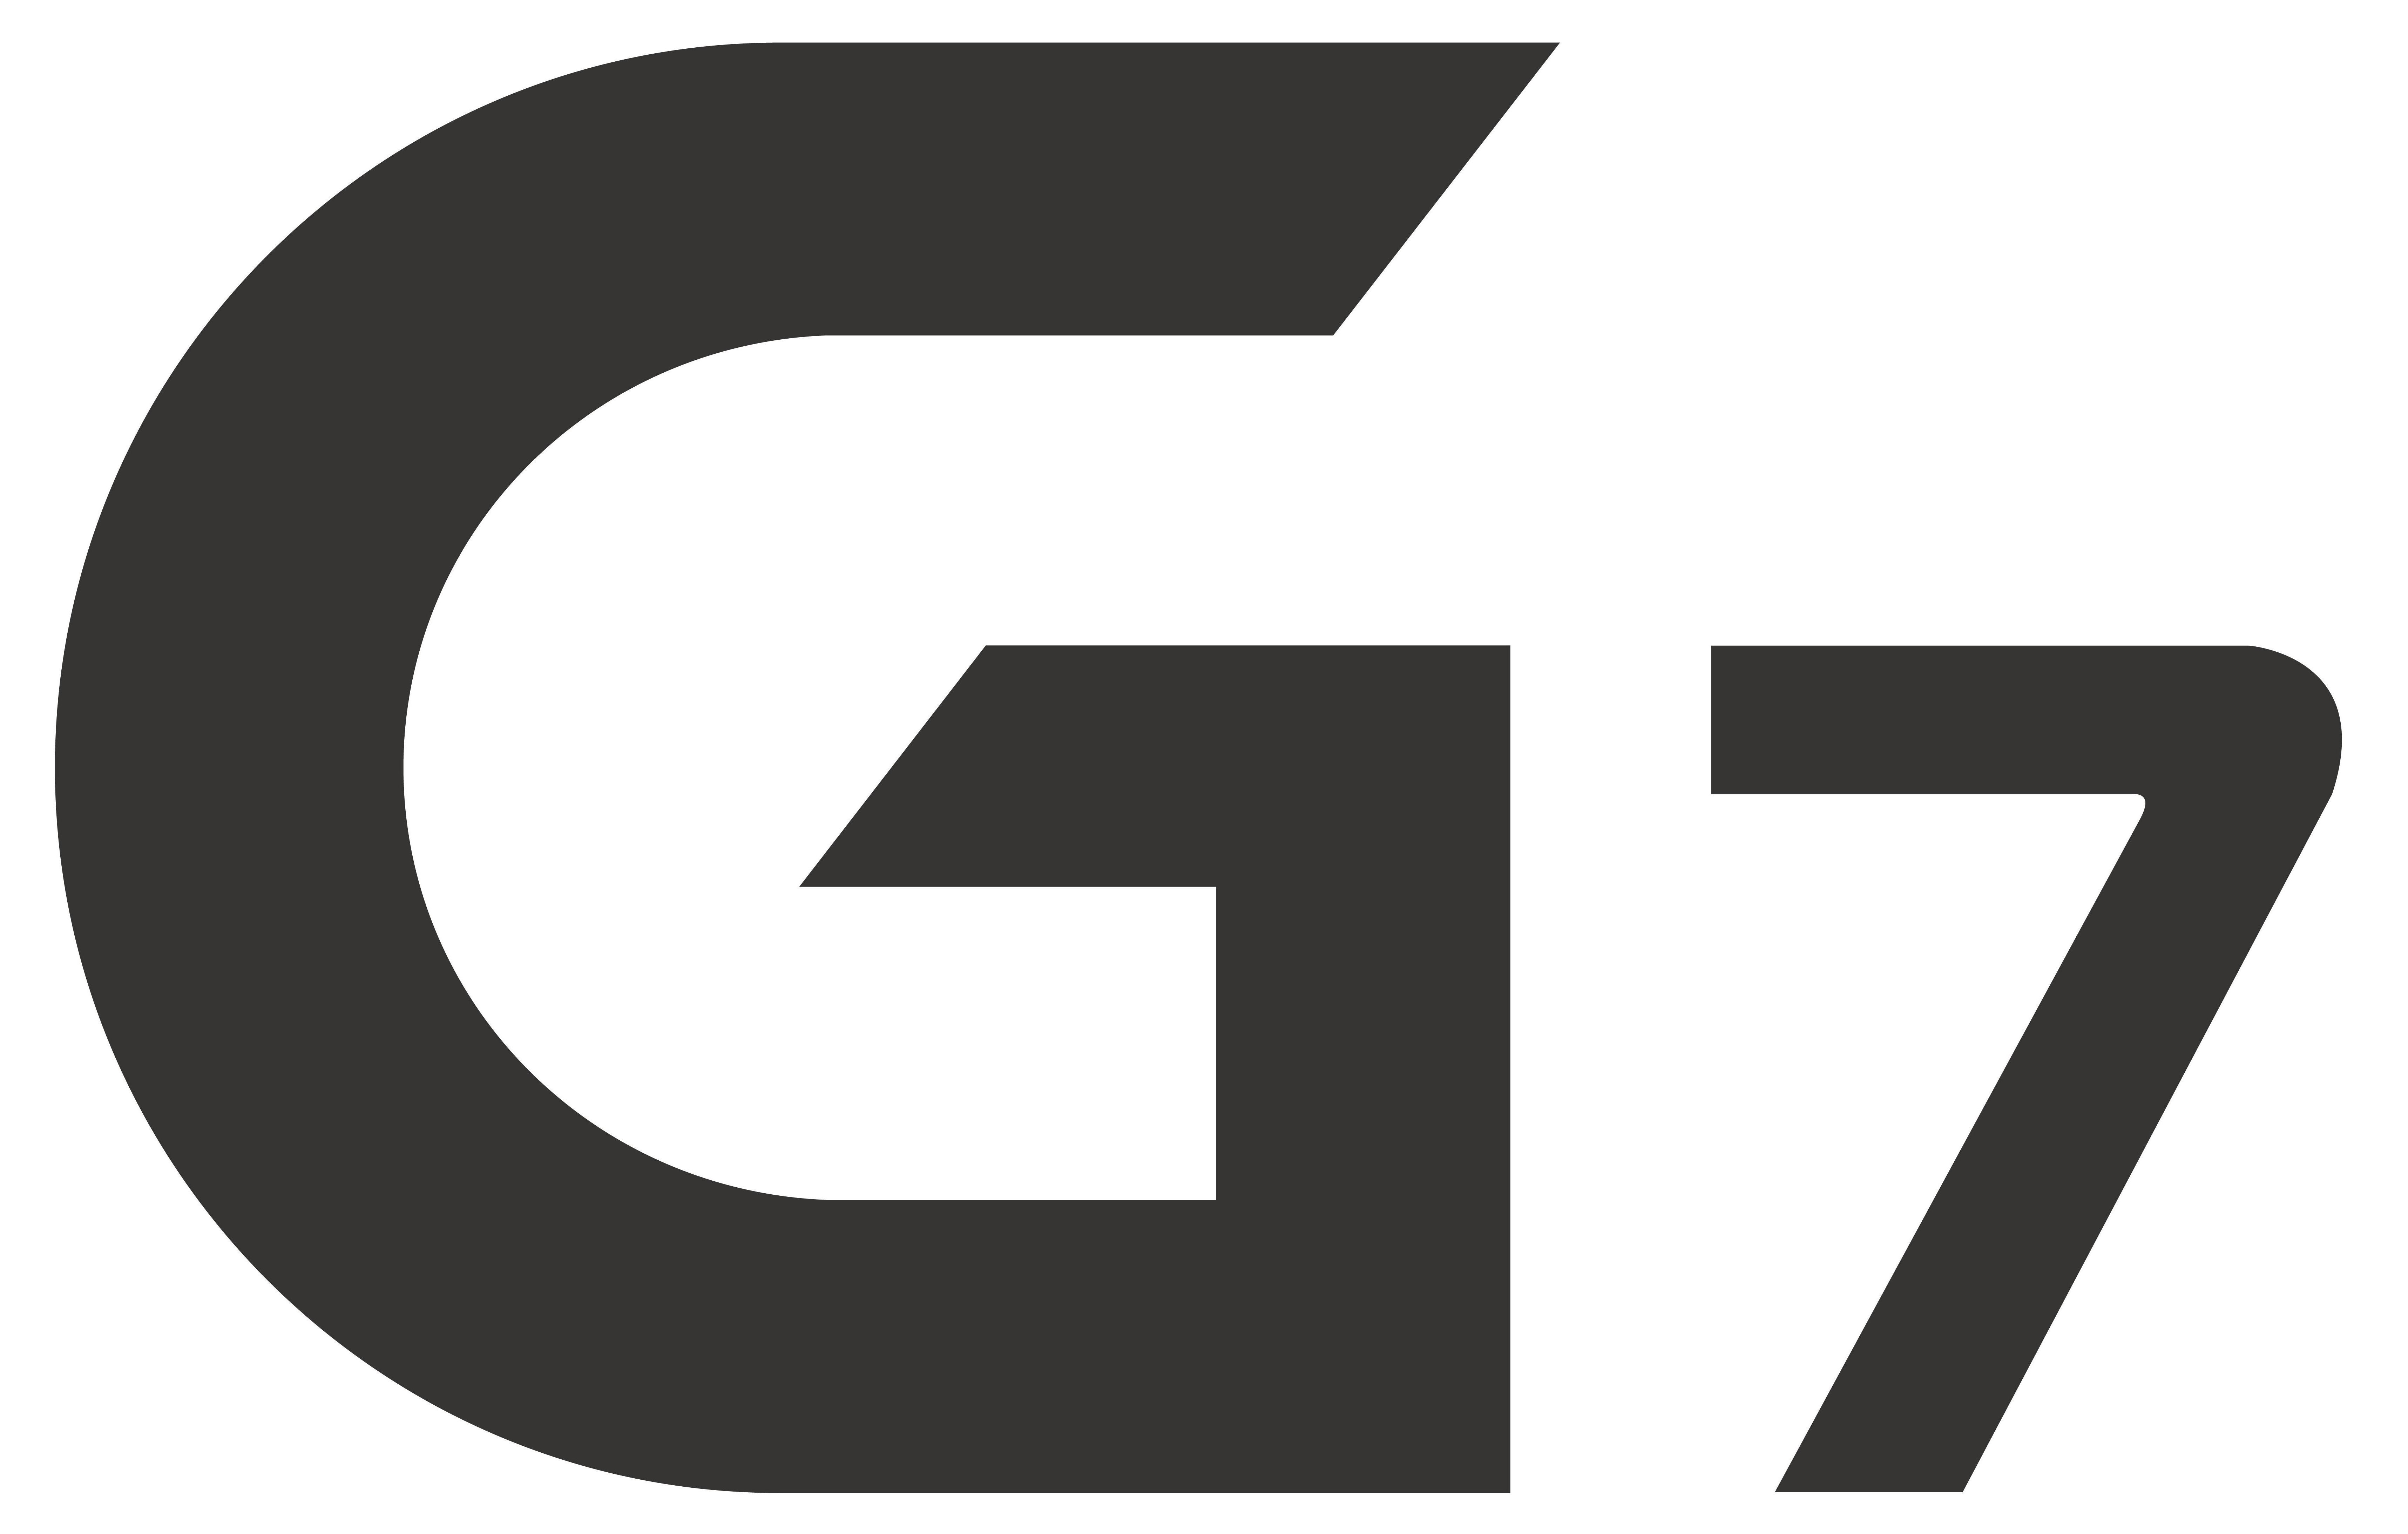 Gray Phone Logo - LG G7 ThinQ phone will be unveiled May 2